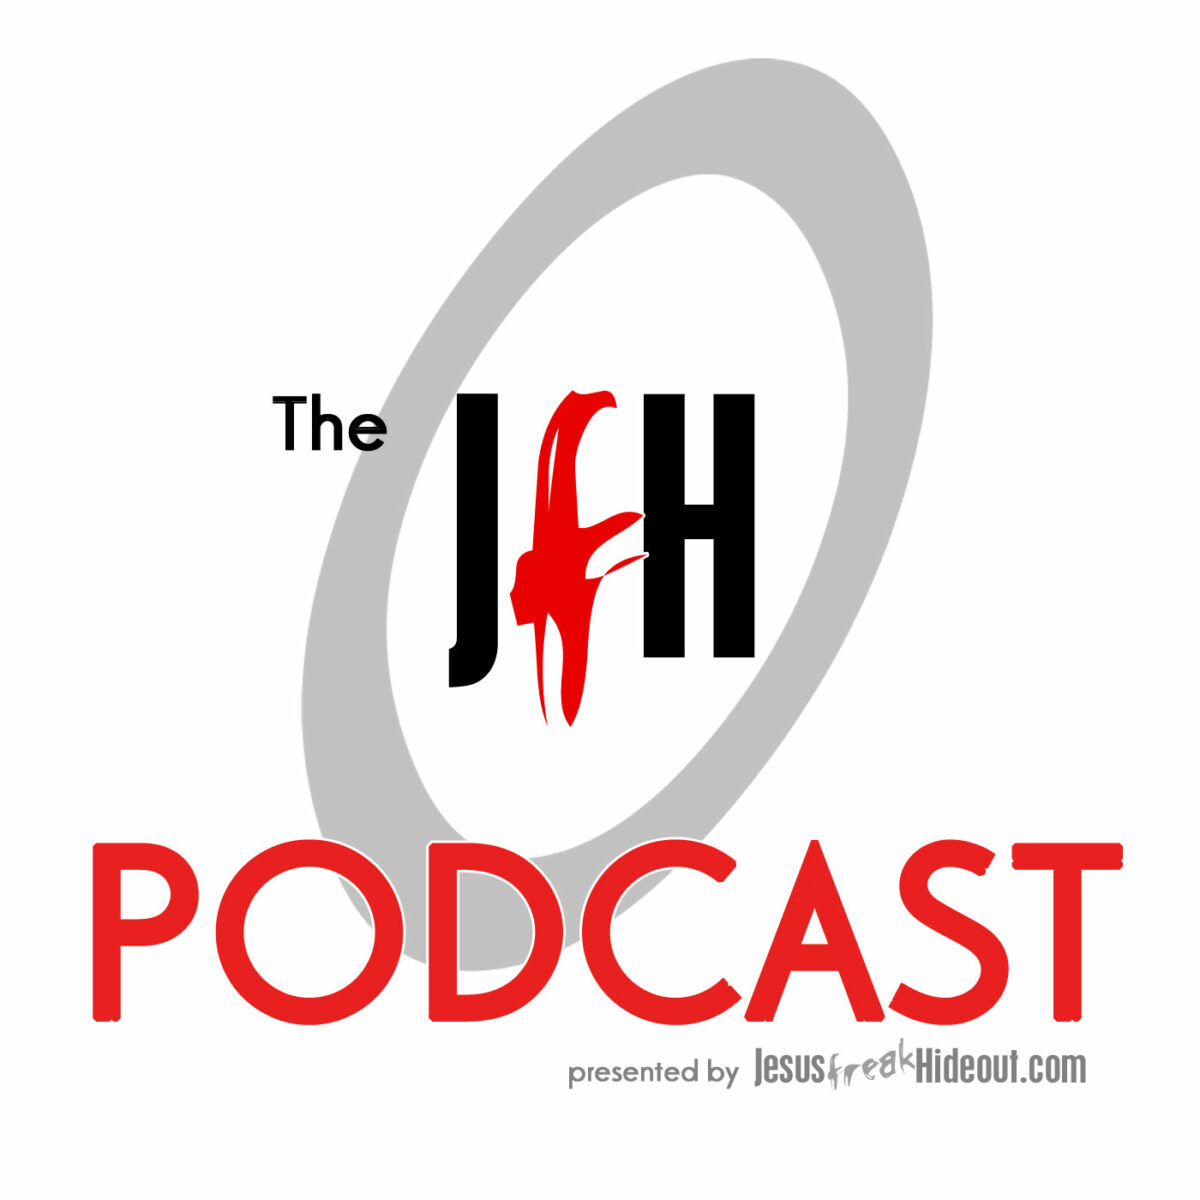 The JFH Podcast 199: 199: Growing Up and PLAY! Time (feat. PEABOD)